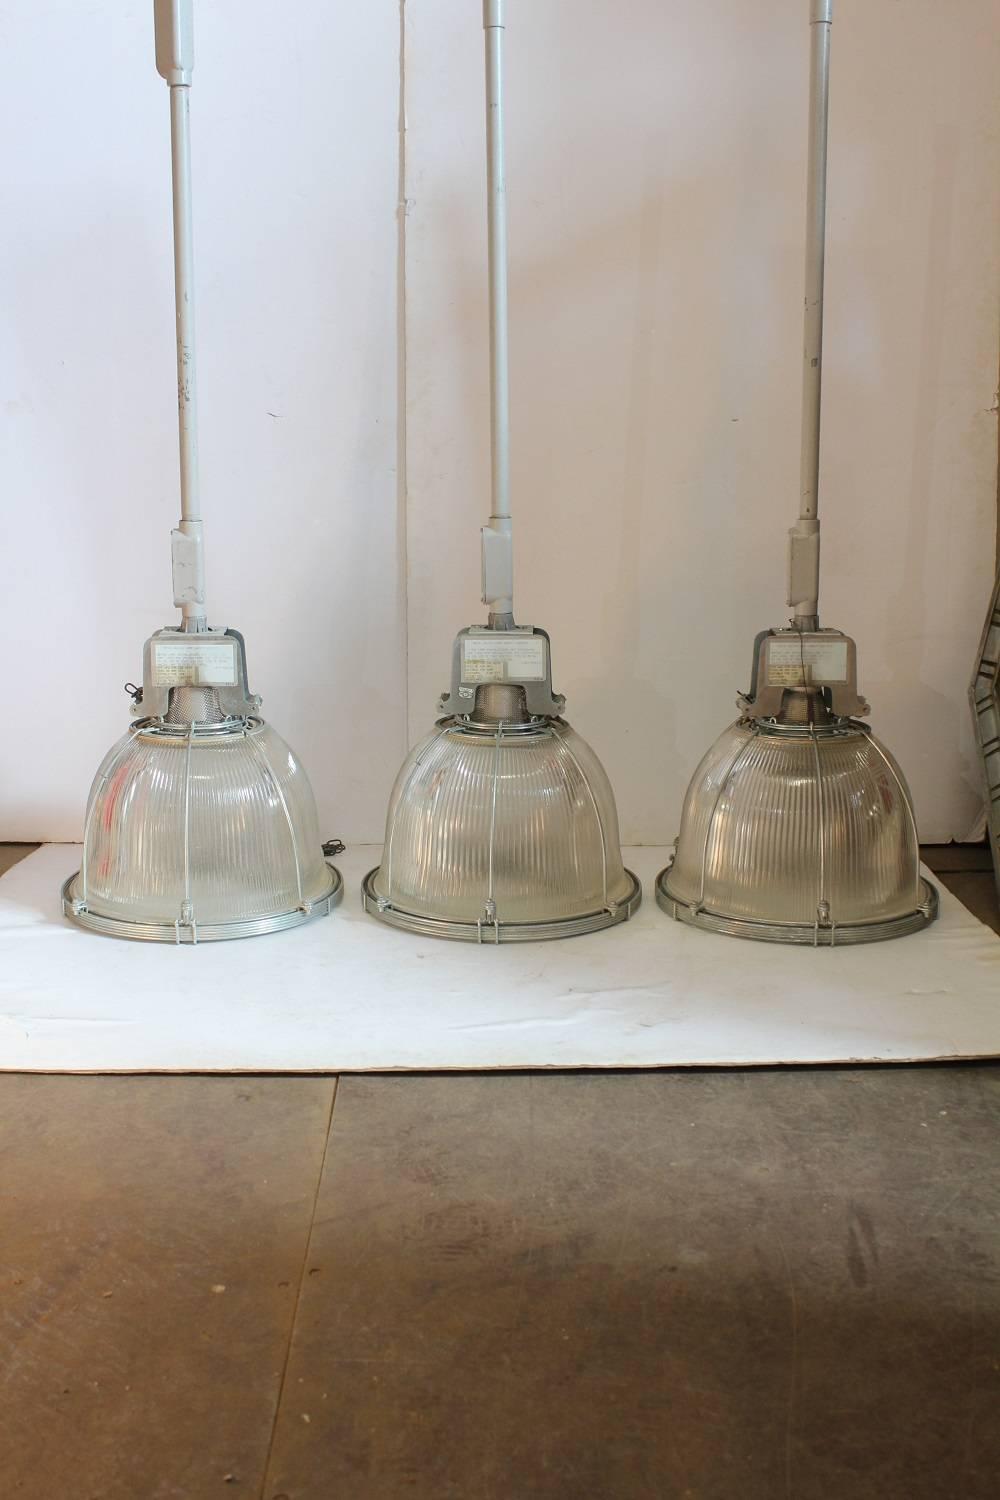 Vintage gymnasium holophane pendant light, 40 available. Height could be adjustable. Please contact us for more information. Rewired and in working condition.